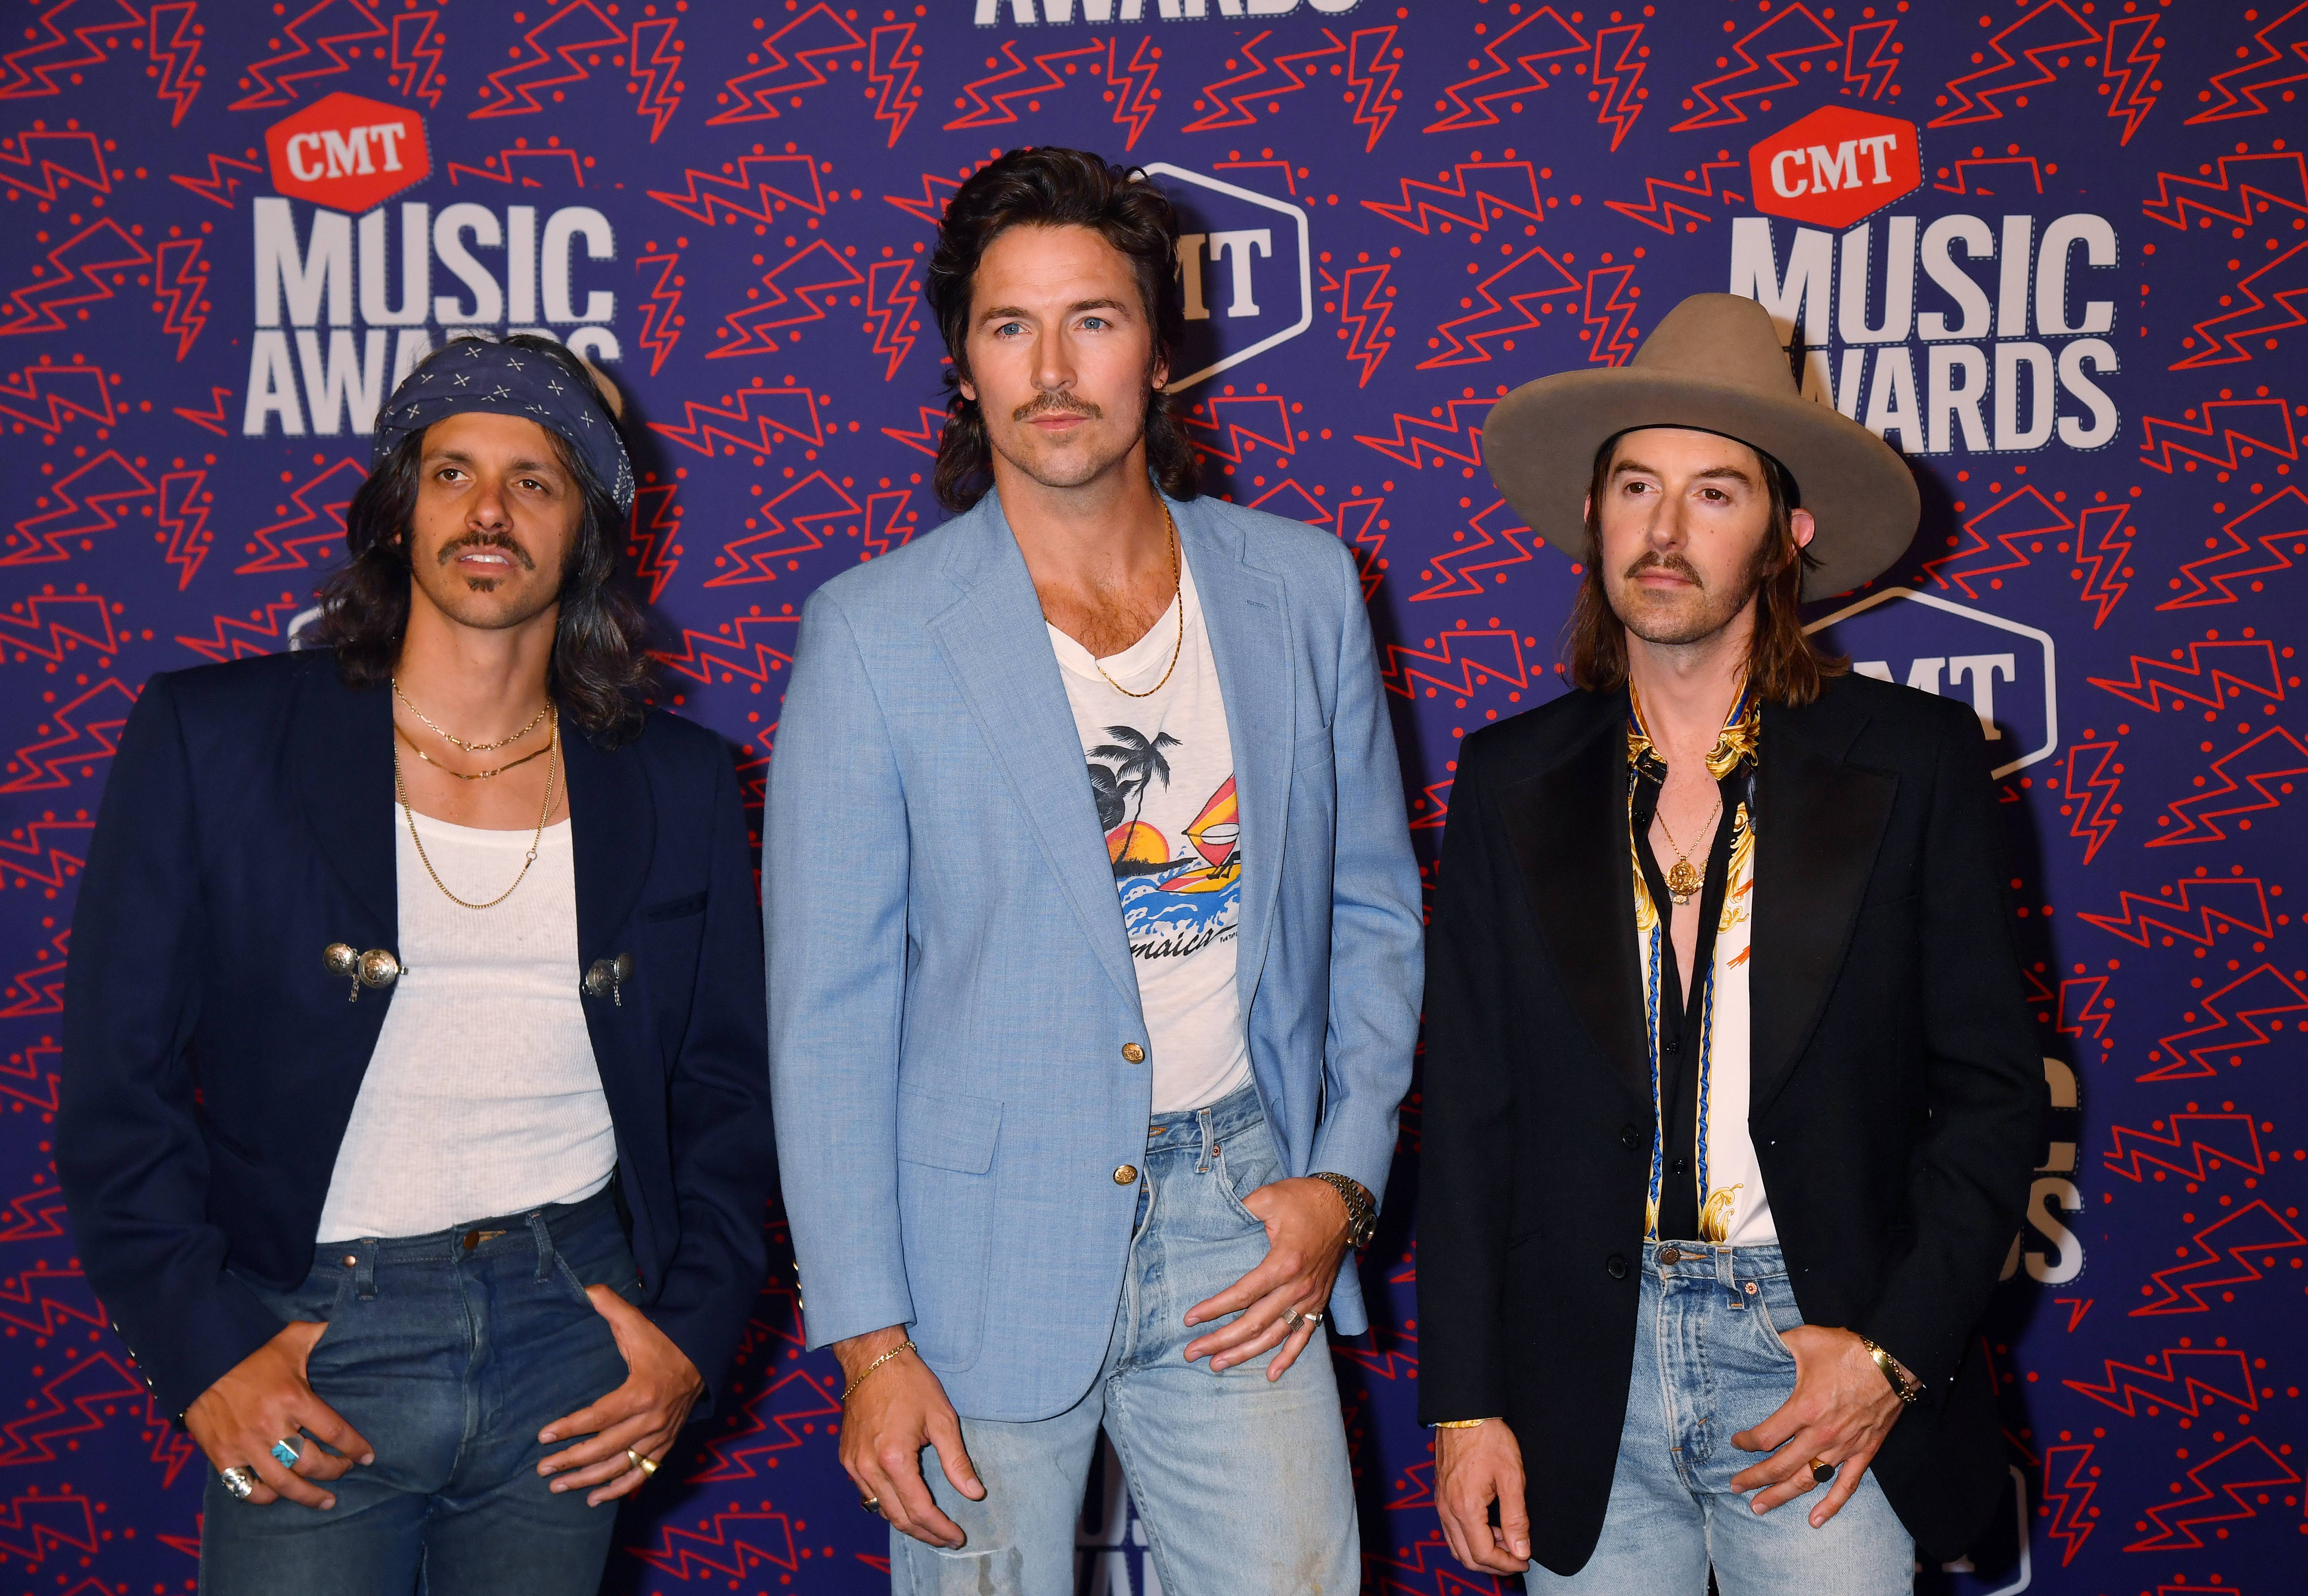 Midland Plots Five-Song 'The Last Resort' Project, News